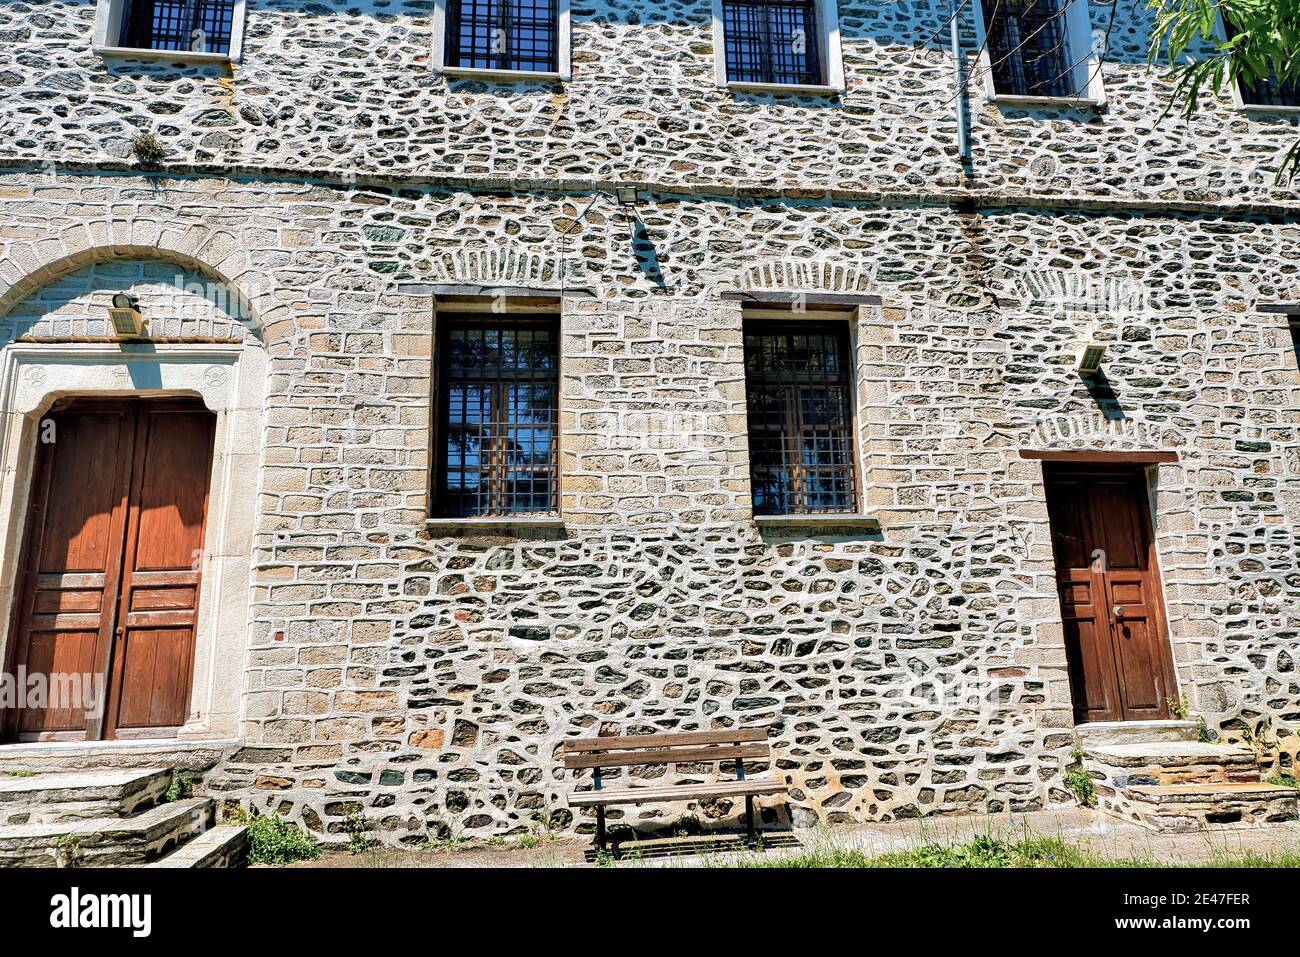 Old typical stone building under the sunlight in Greece Stock Photo